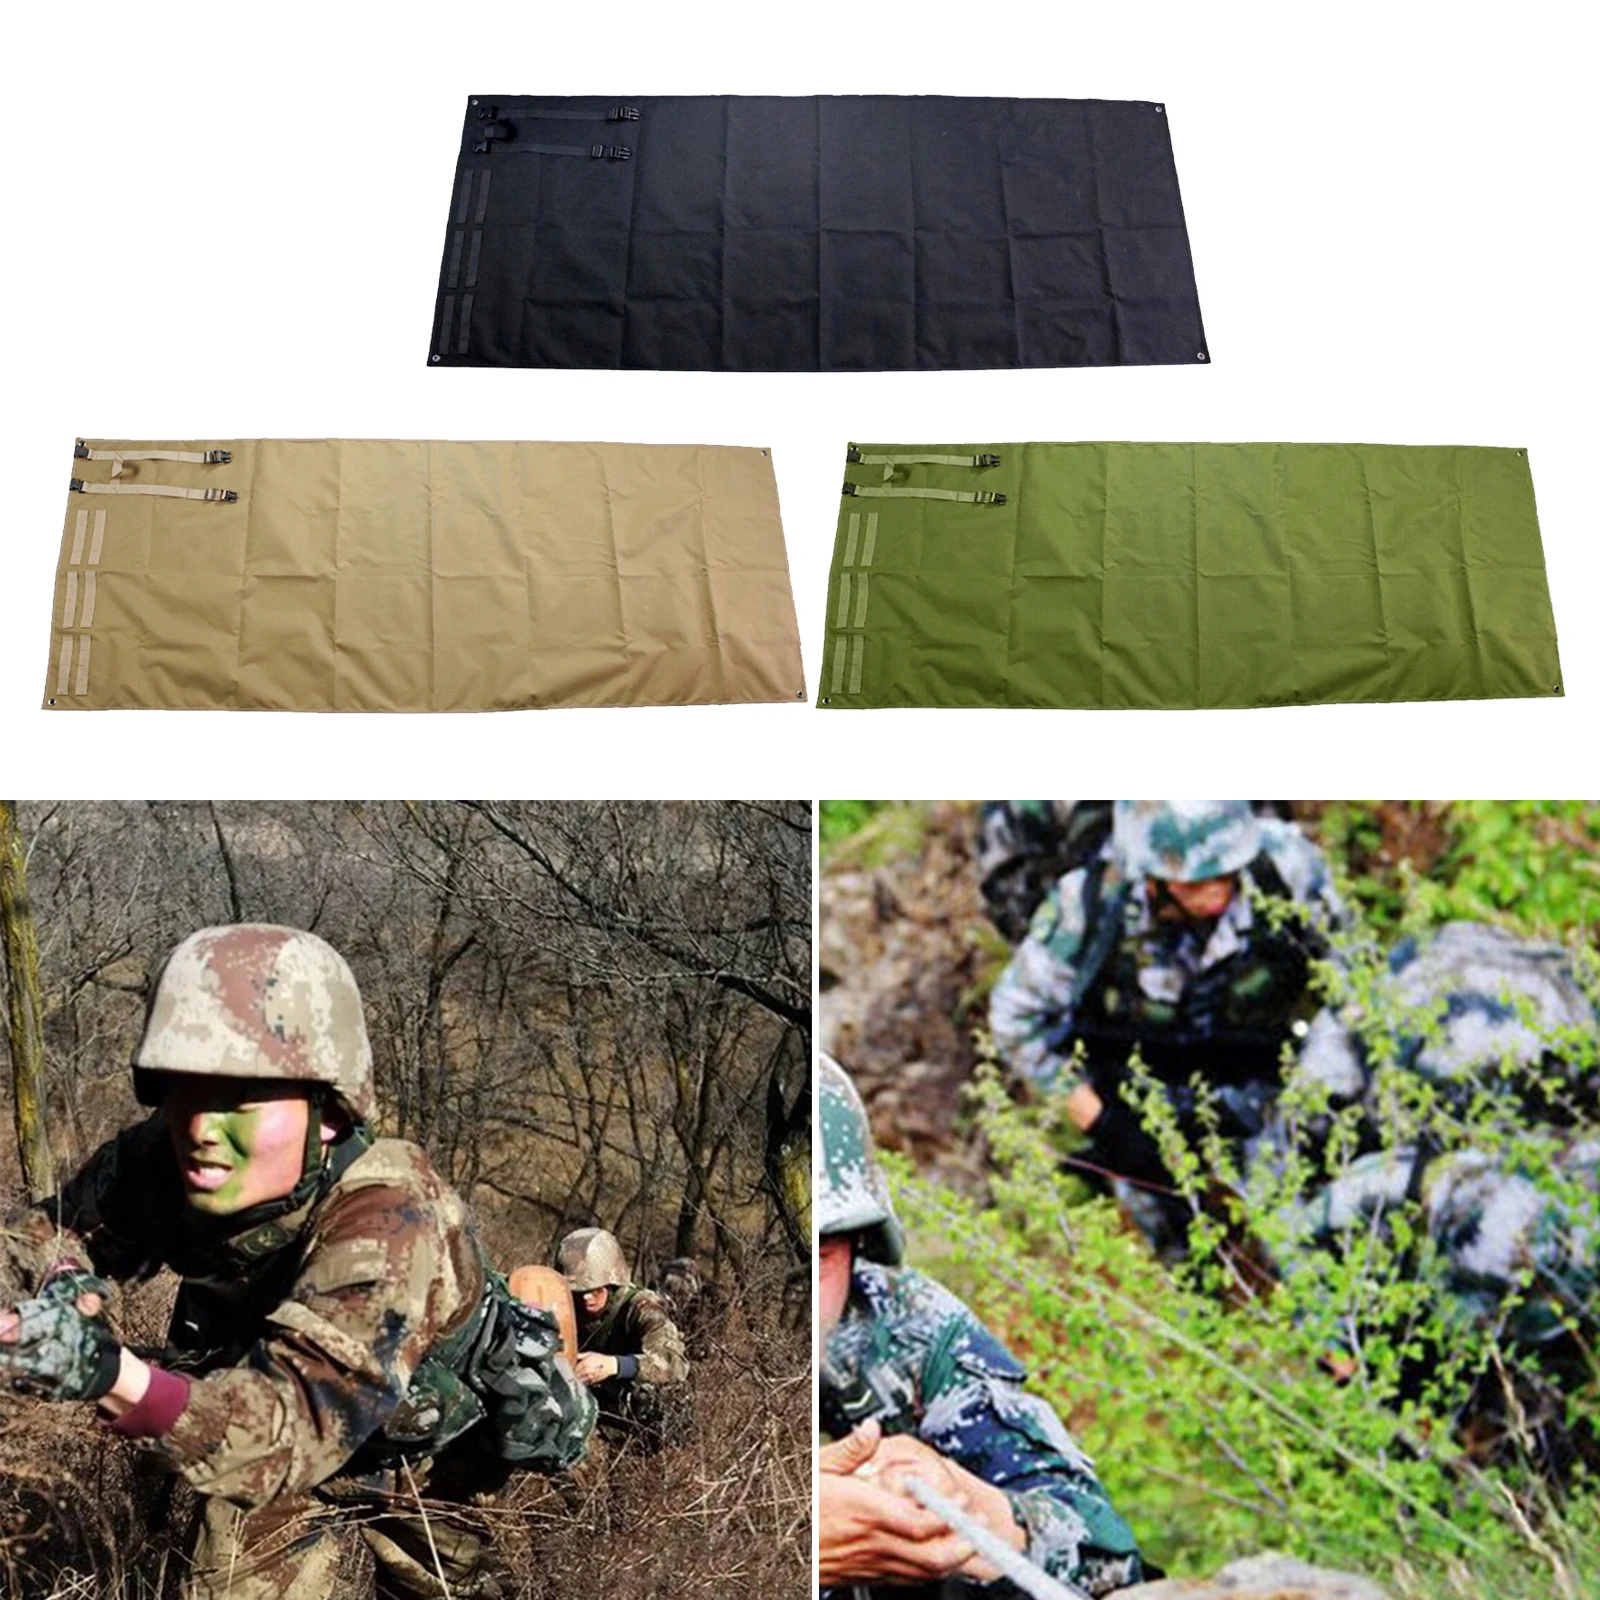 Roll Up Shooting Mat,Non-Slip Durable Shooting Rest Hunting Accessories, Hunting Mats